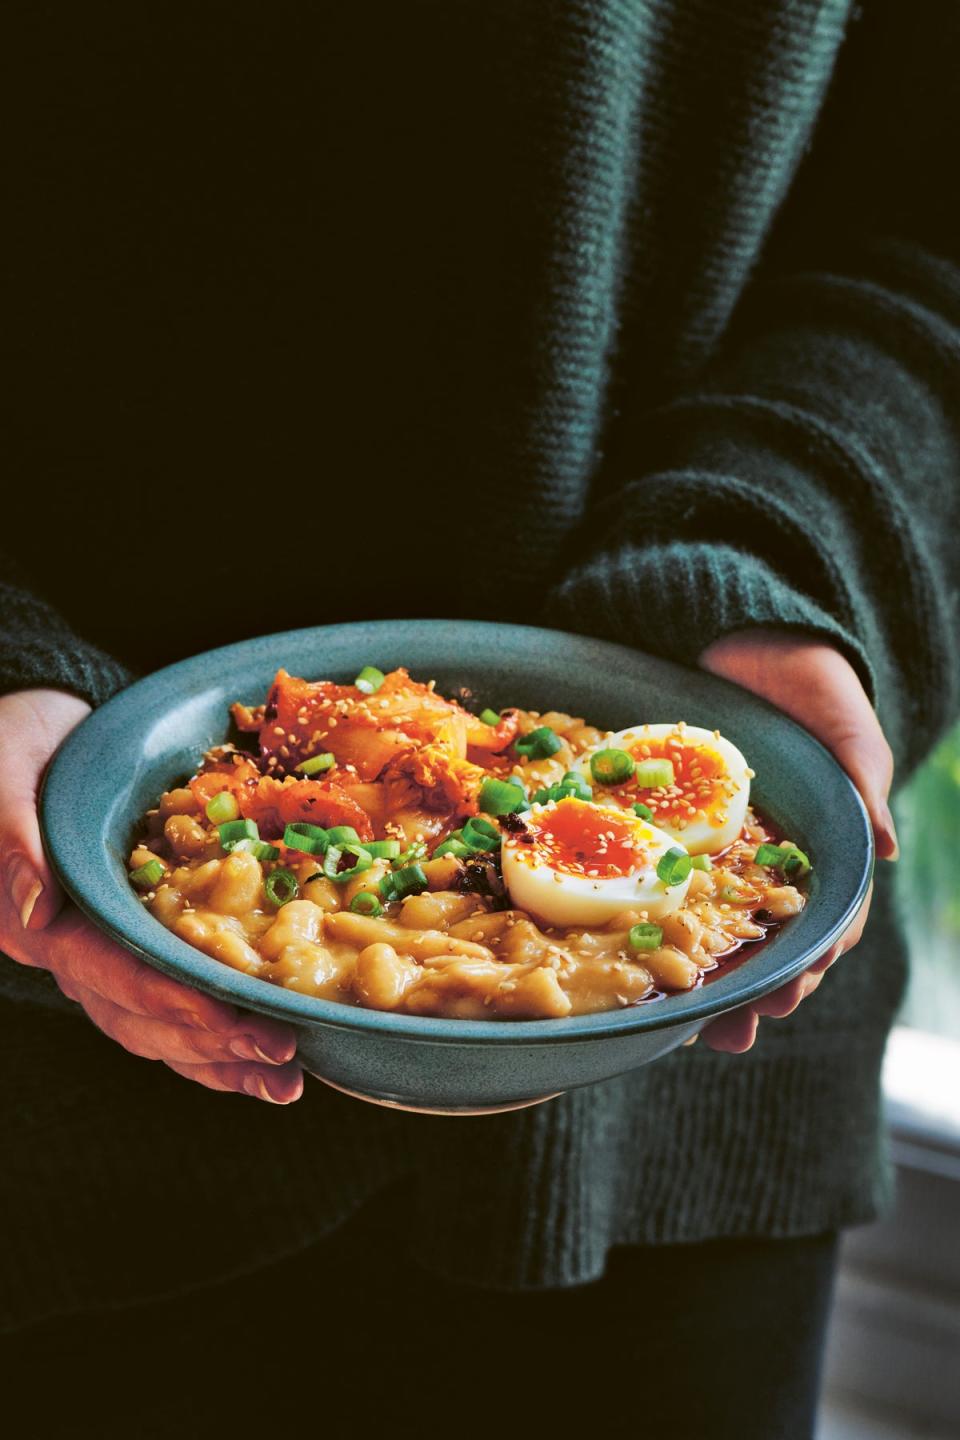 Miso paste plus creamy, soft white beans is a thing of magic (Joe Woodhouse)